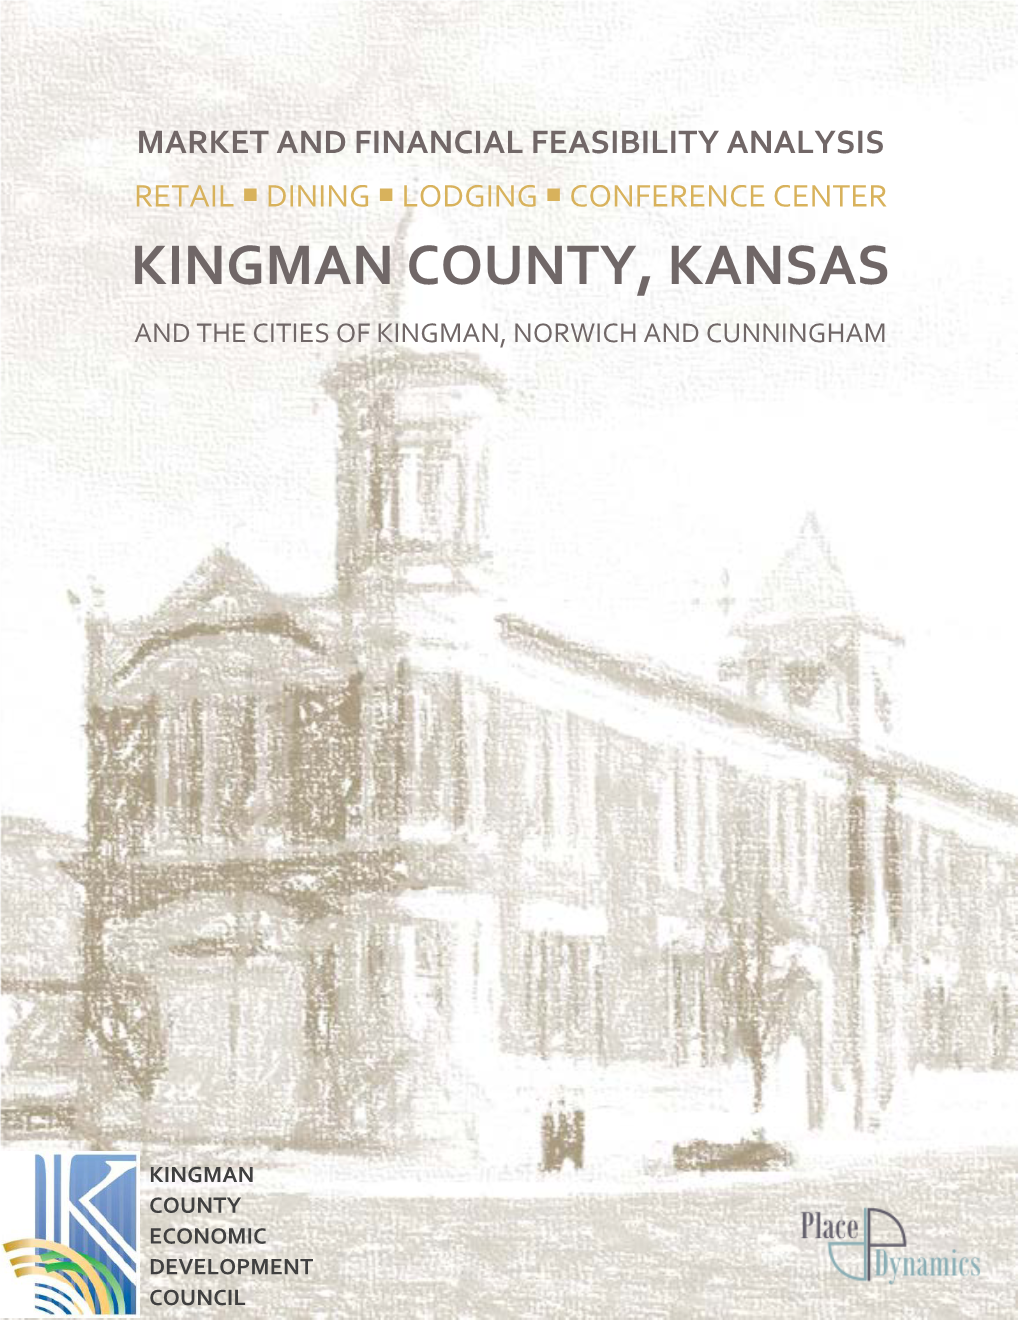 Kingman County, Kansas and the Cities of Kingman, Norwich and Cunningham